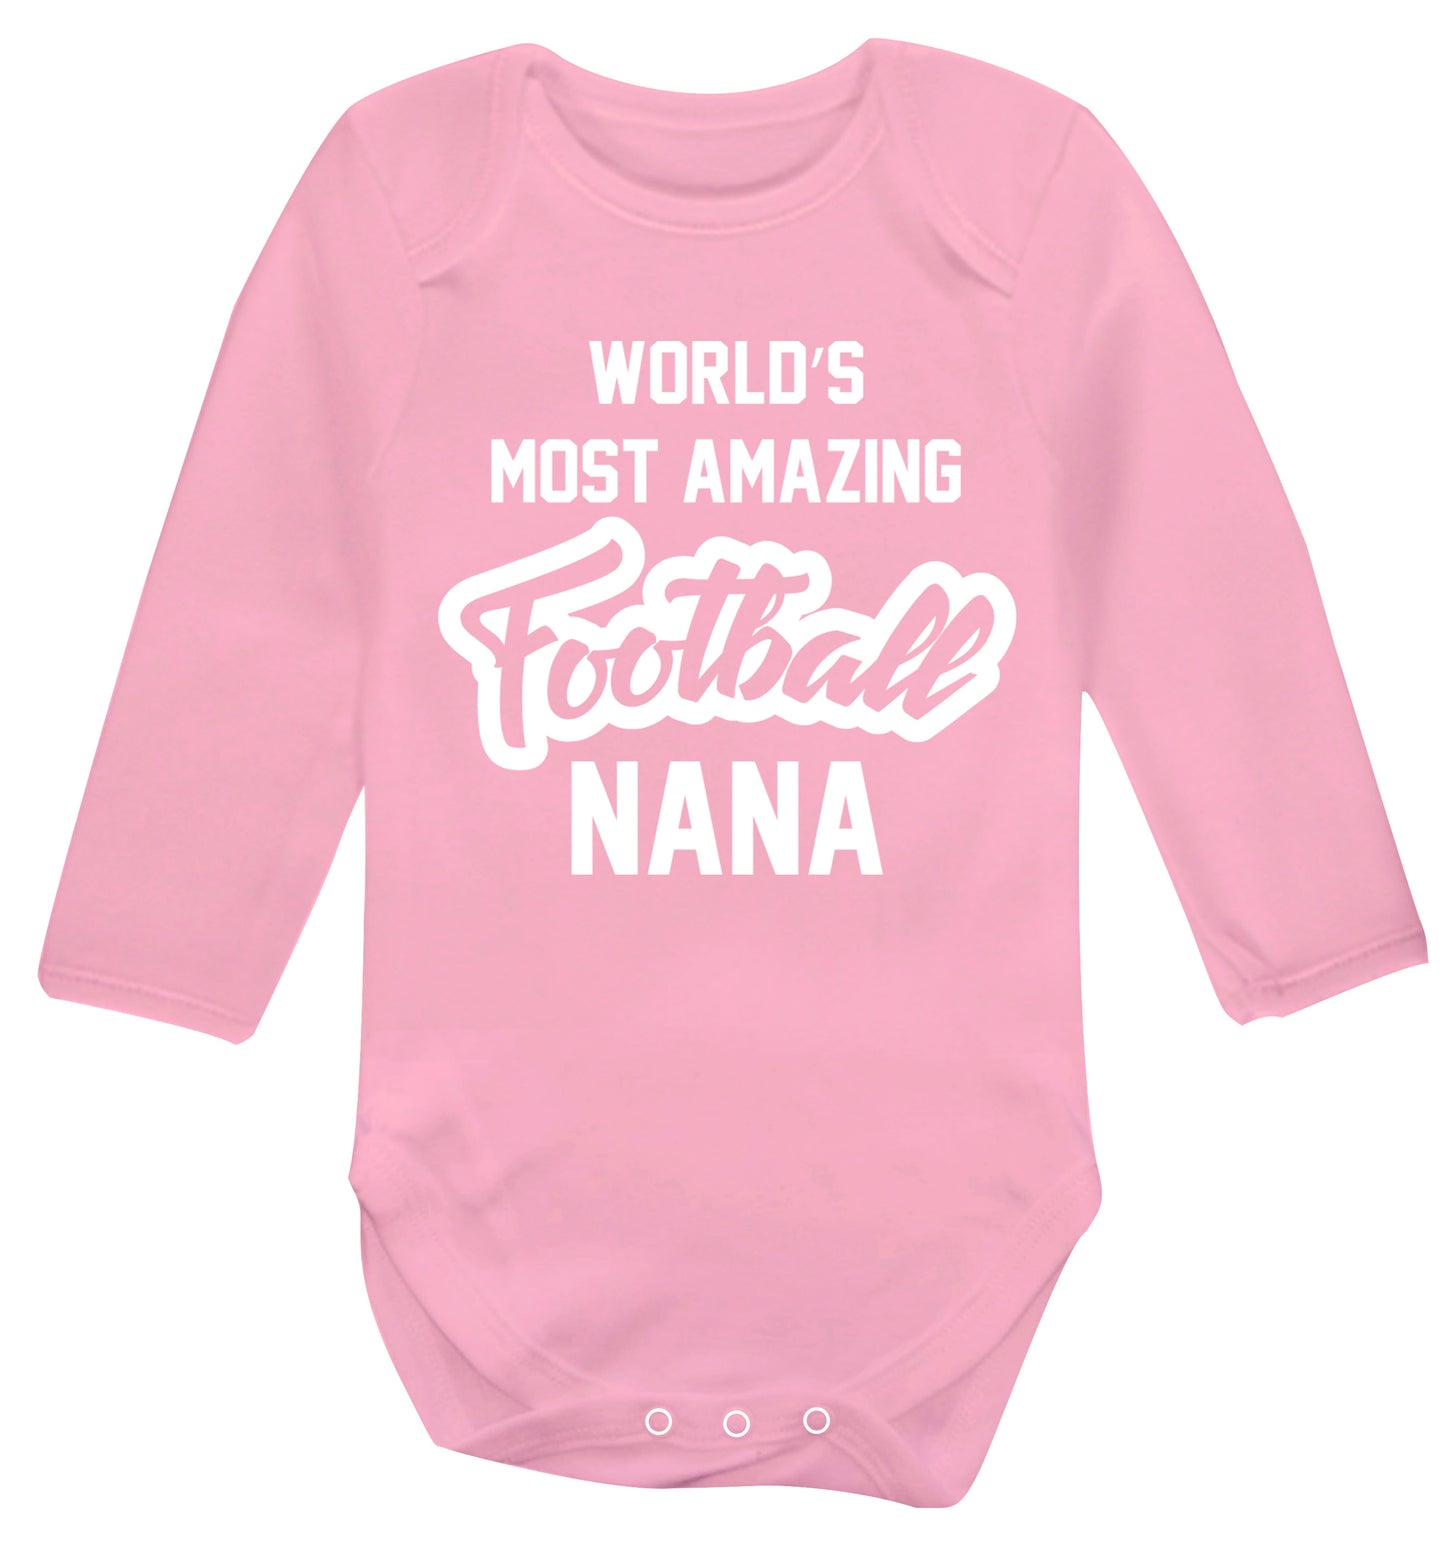 Worlds most amazing football nana Baby Vest long sleeved pale pink 6-12 months